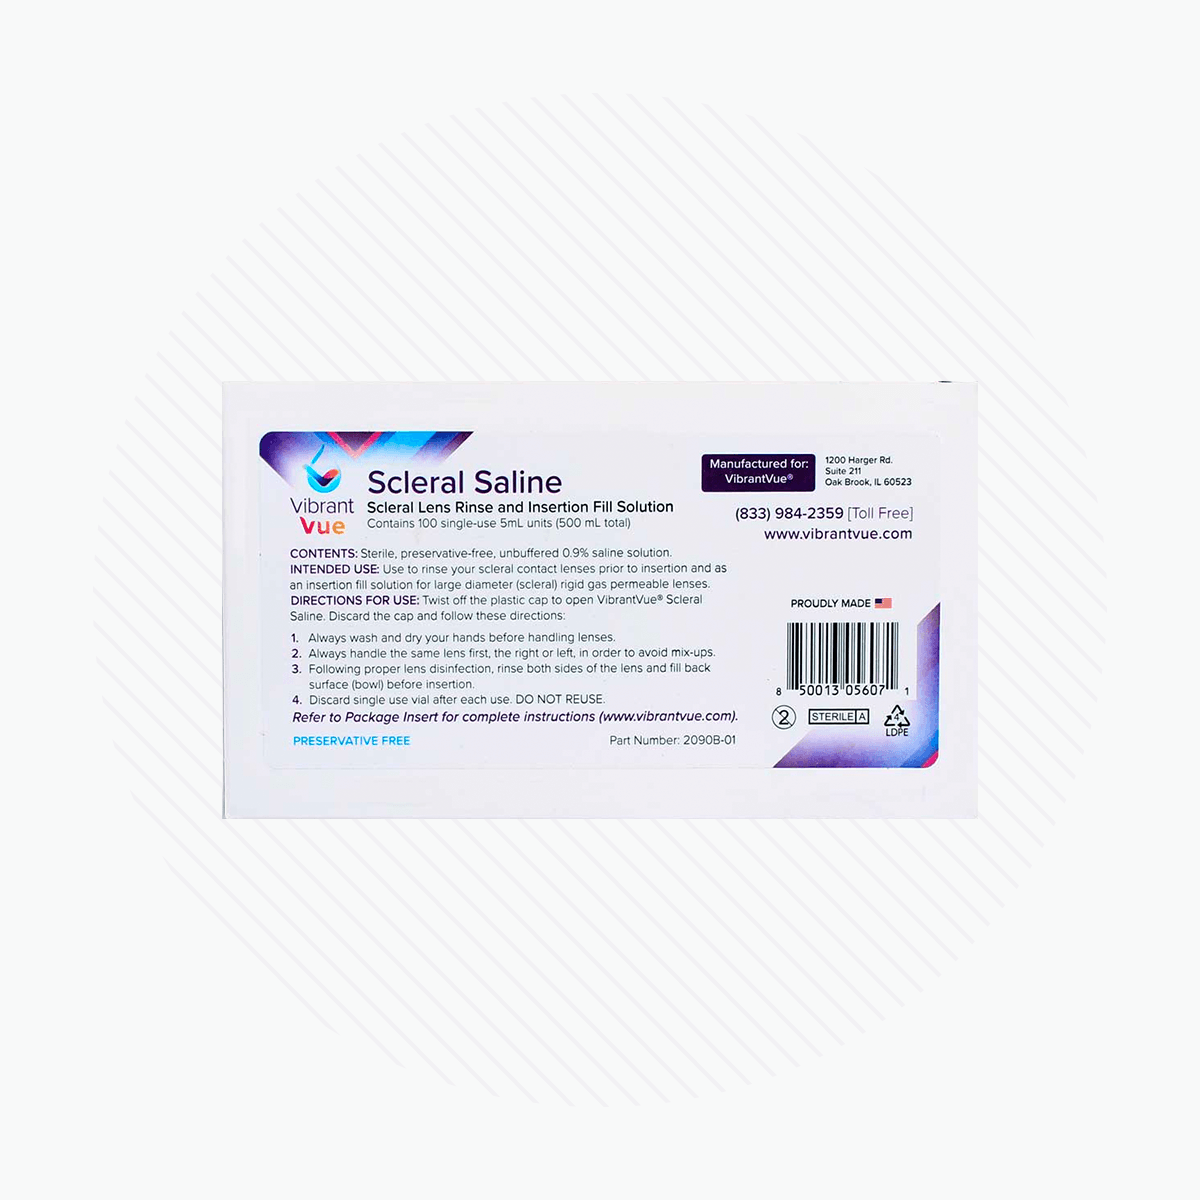 Vibrant Vue Saline Lens Rinse and Insertion Fill Solution, 100% Preservative Free, 100 Vial box - DryEye Rescue Store